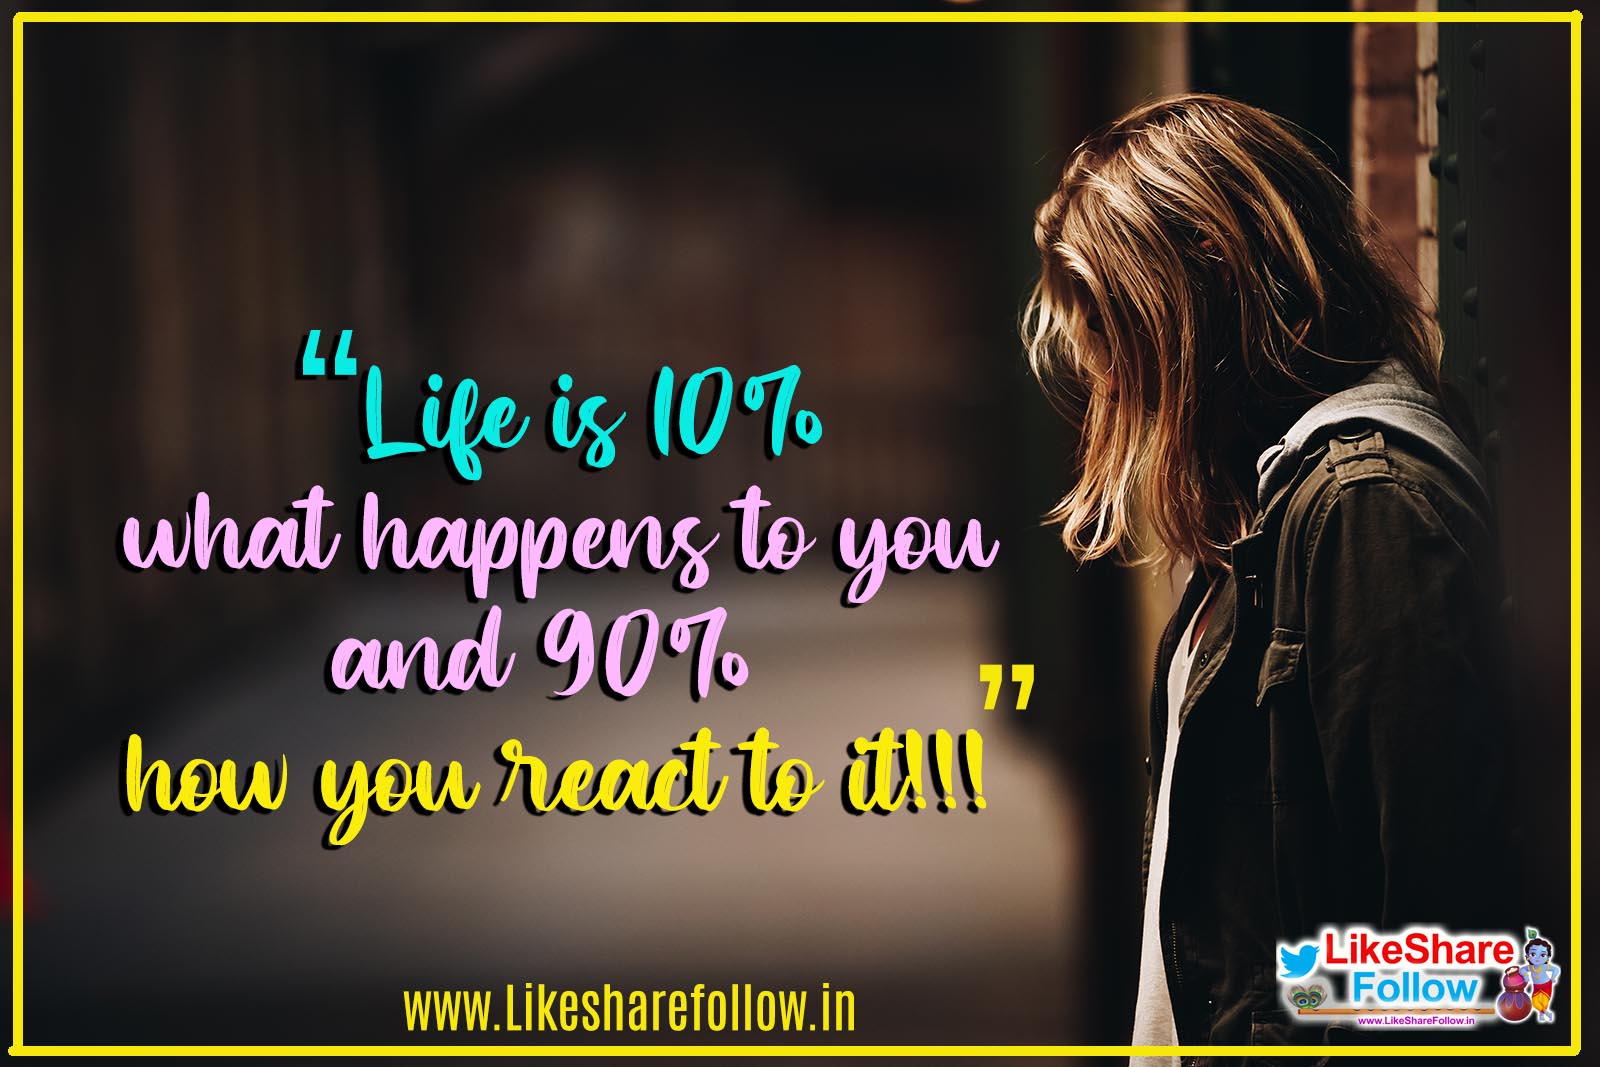 Unique Quotes On Life Inspiring The Happy Good And Funny In Life. QUOTES GARDEN TELUGU. Telugu Quotes. English Quotes. Hindi Quotes